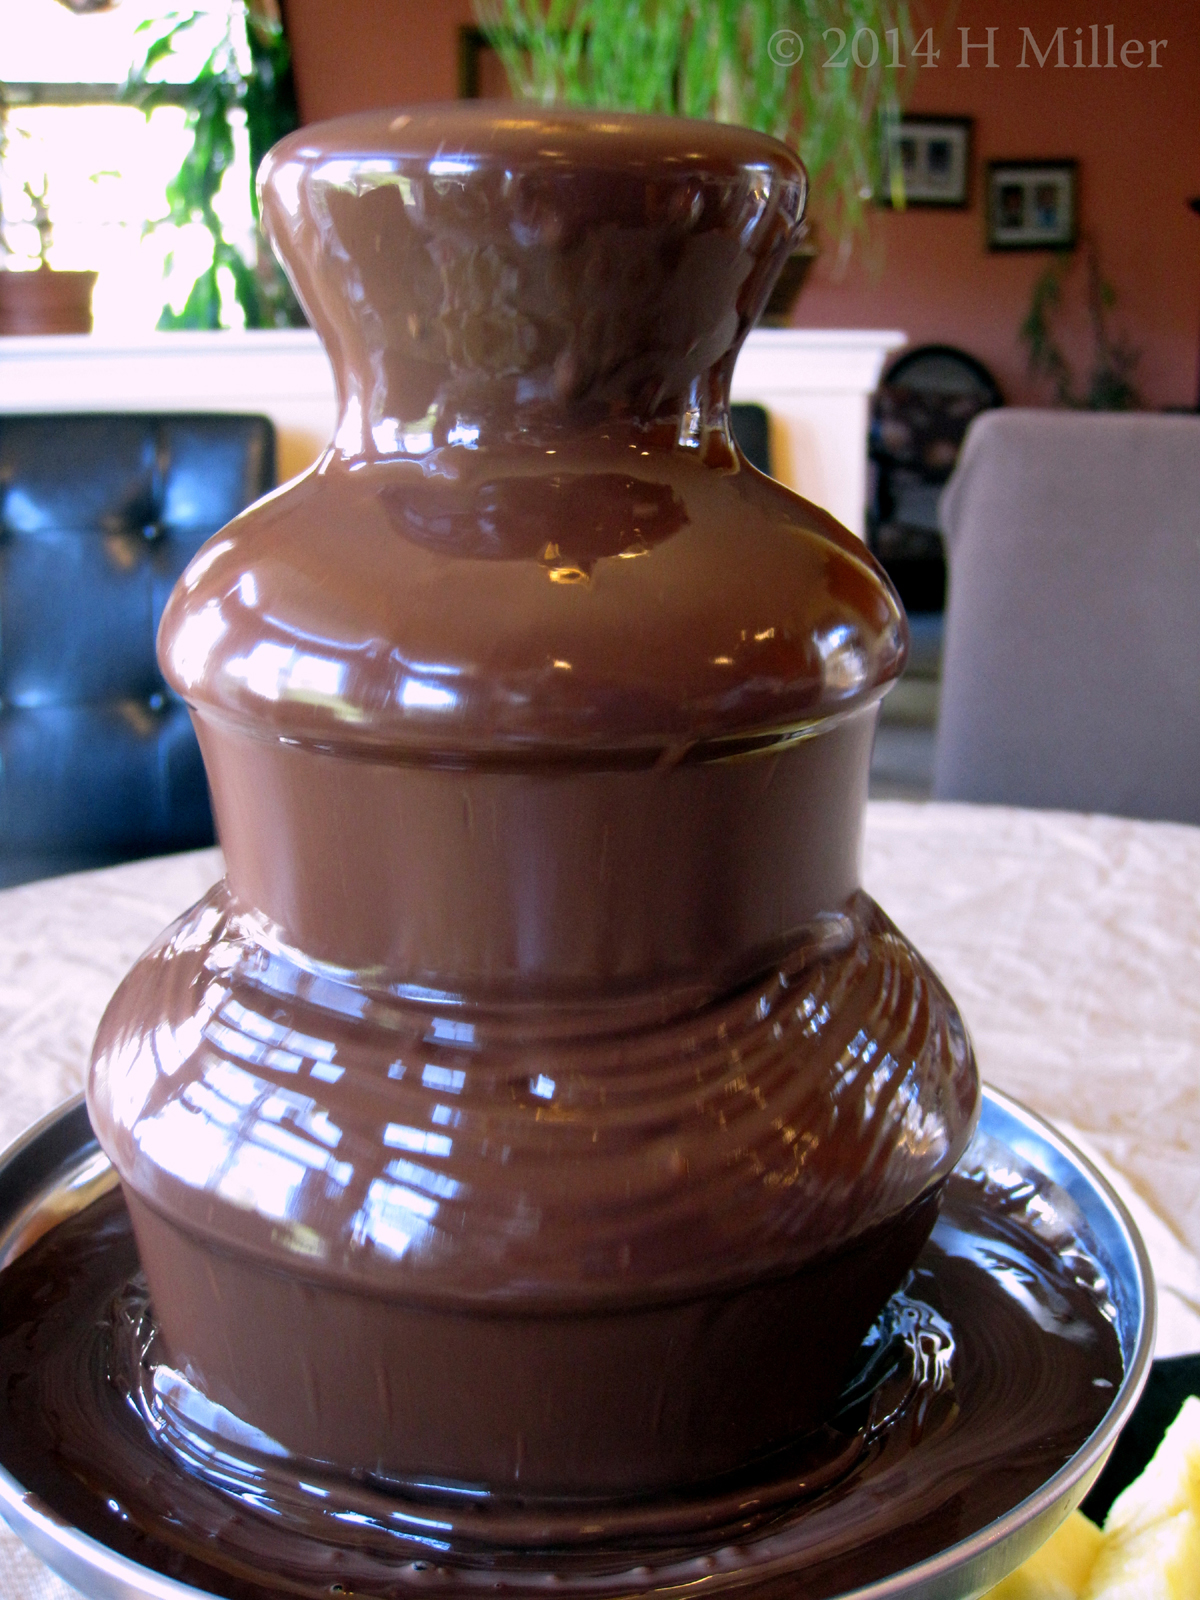 A Chocolate Fountain In Motion.